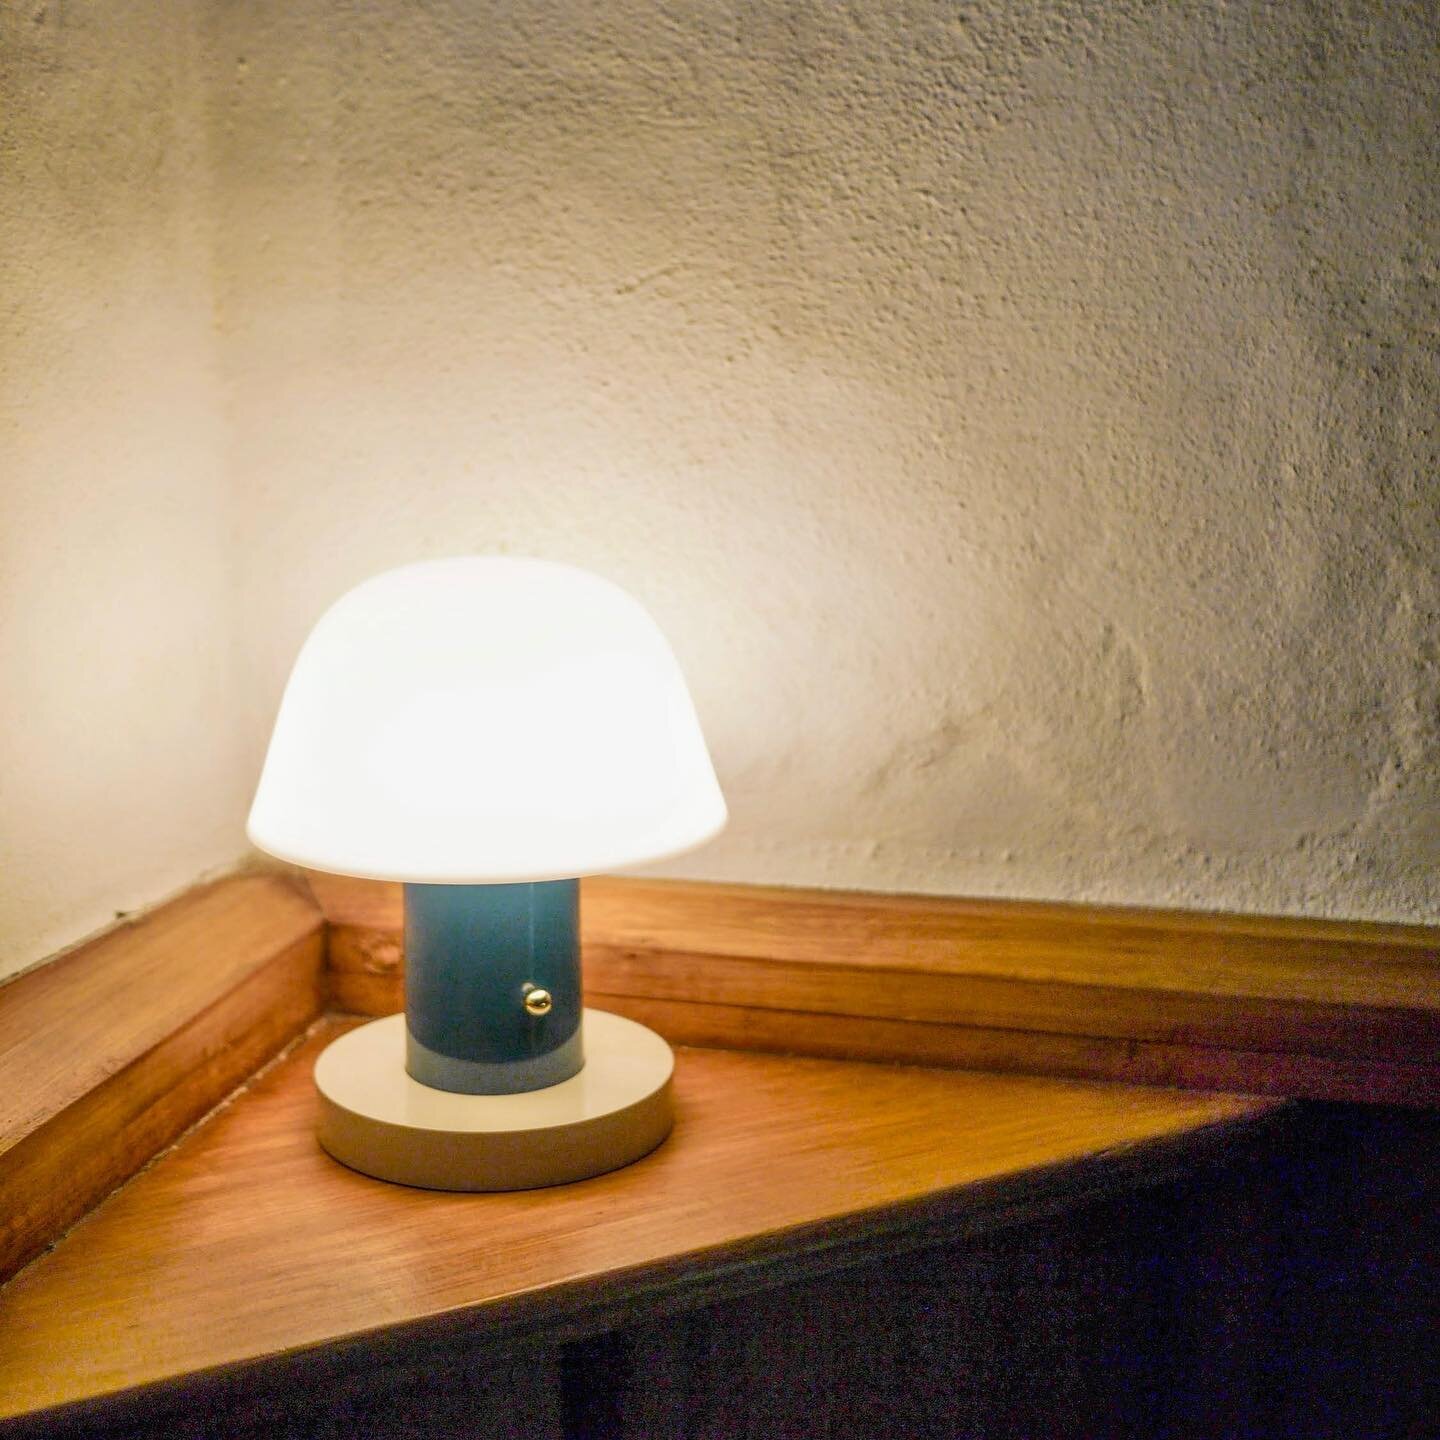 Love this little lamp that sits on the stairs at the barn. It&rsquo;s usb powered so perfect for sitting outside in the summer. 💡
.
.
.
.
.
#midcornwall #cornwall #barn  #authenticliving #lovelife #lovecornwall #CornwallIG #igcornwall #farm #cornish